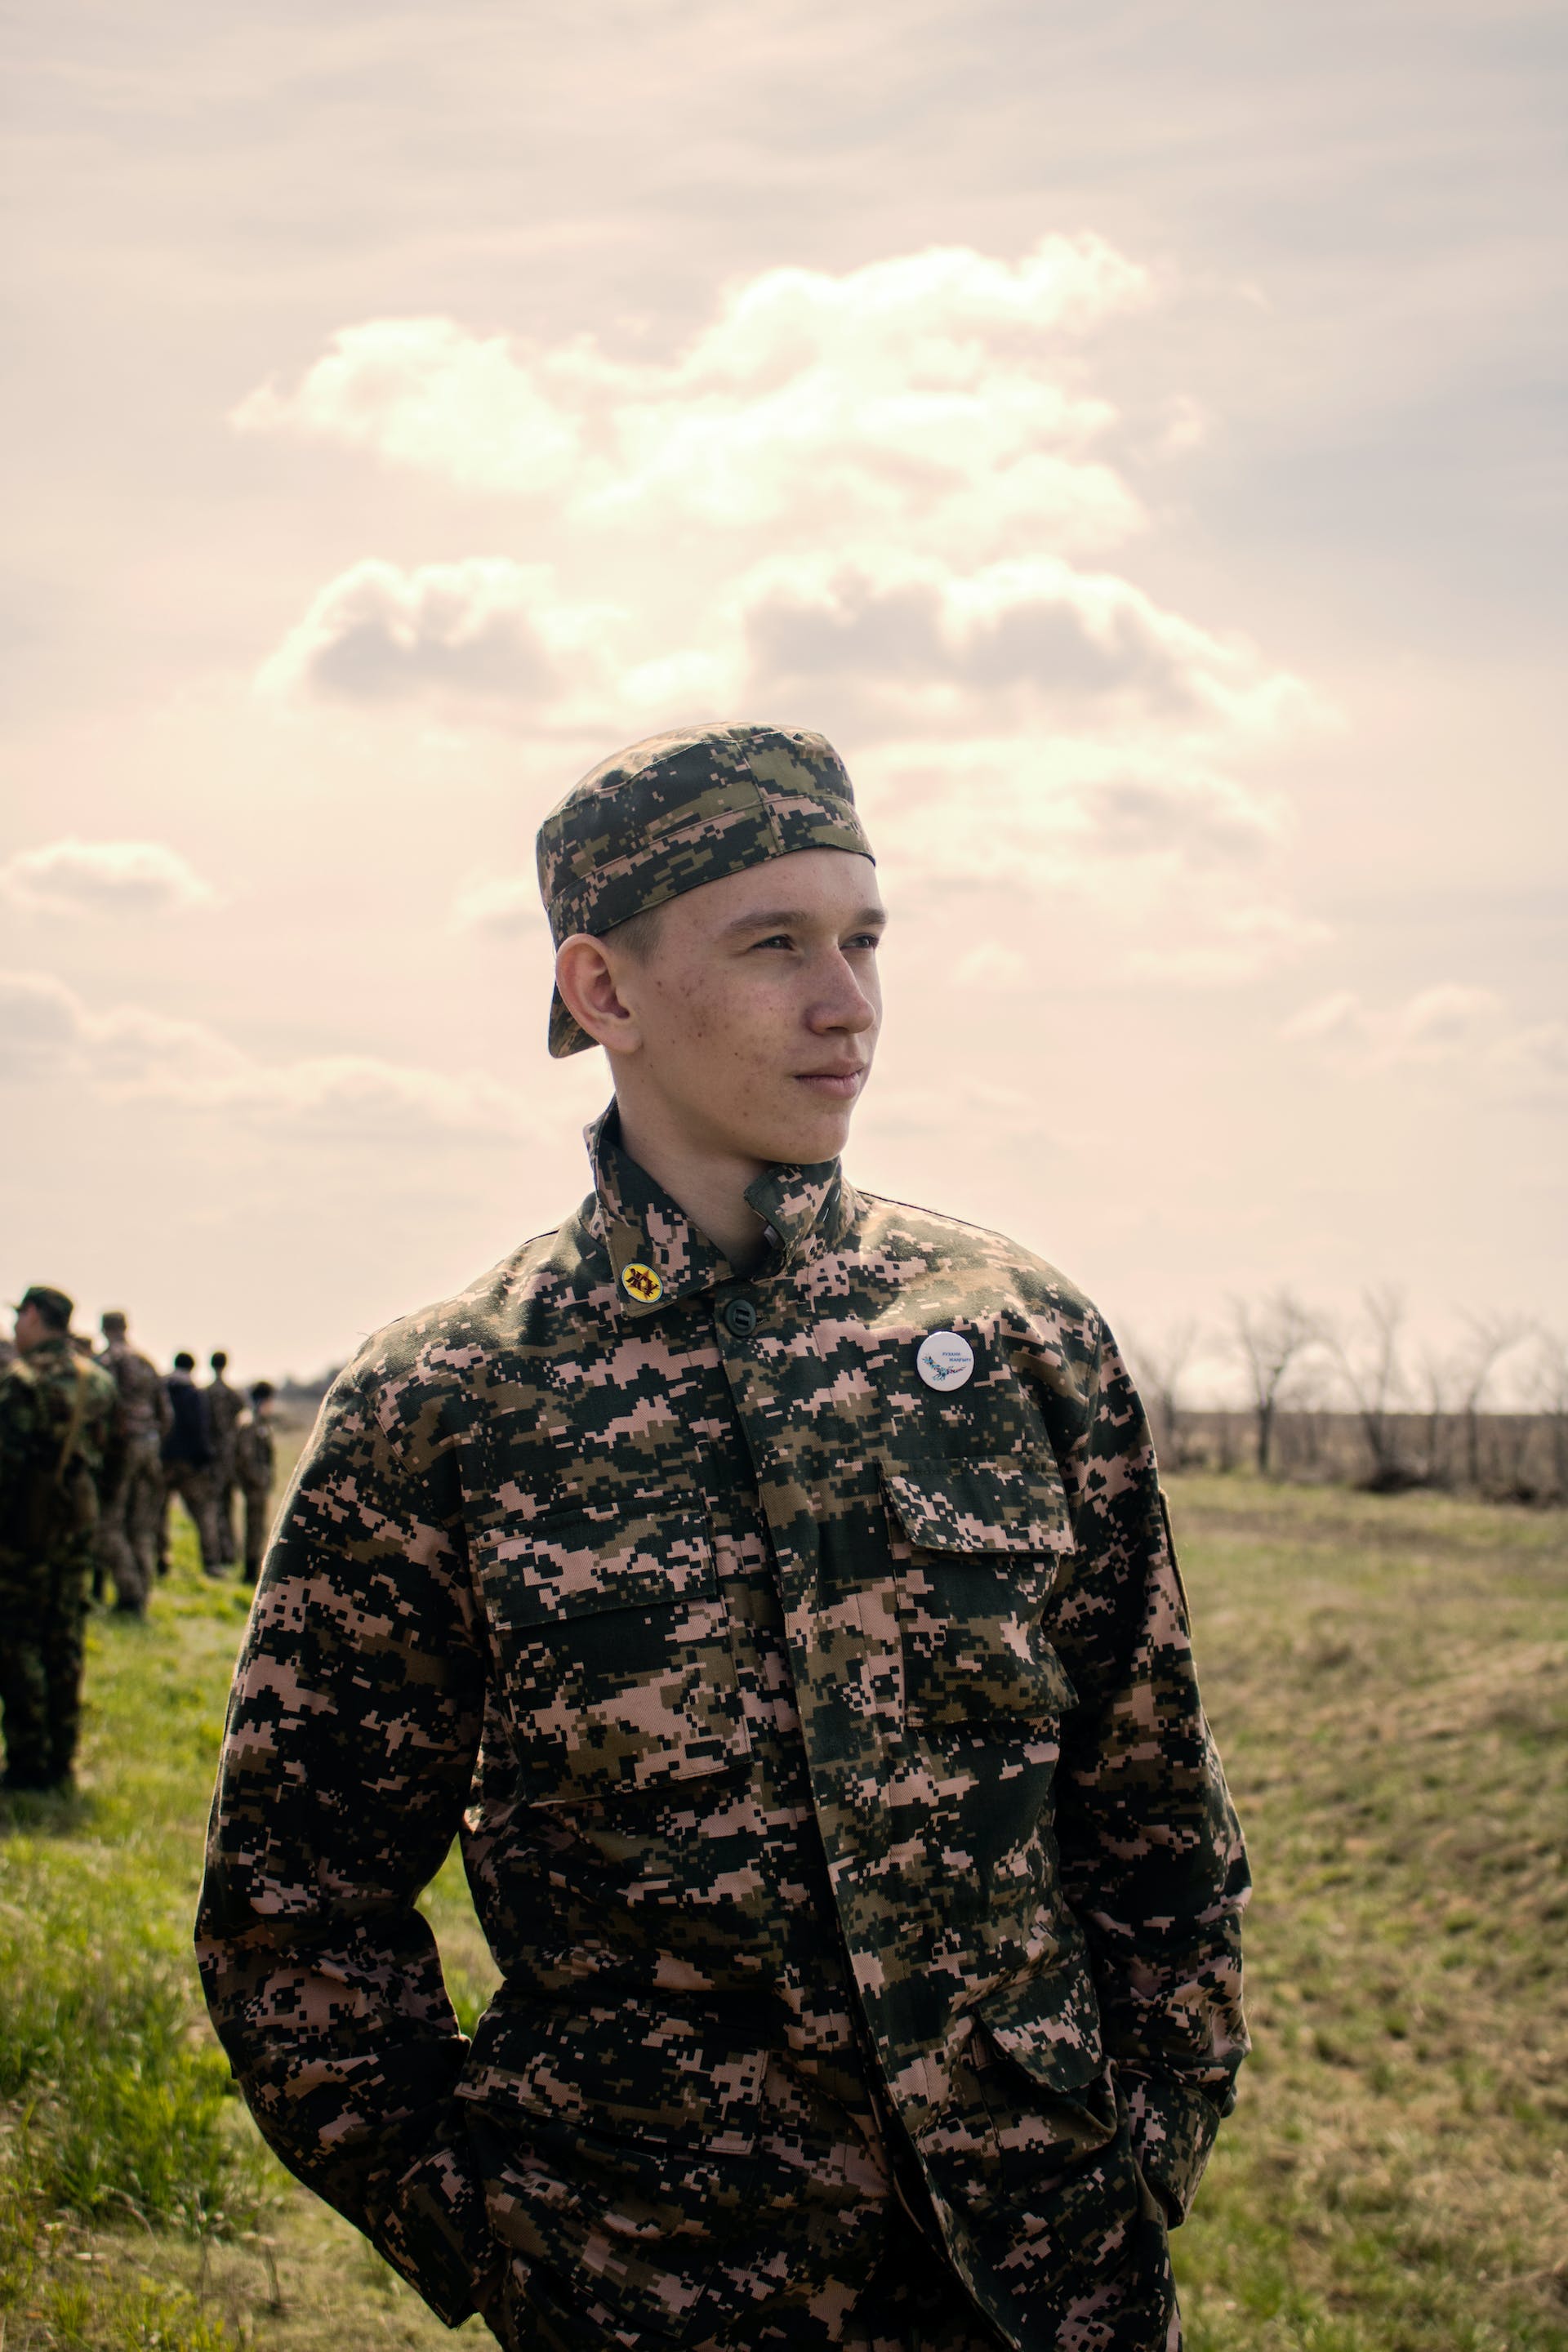 Army officer standing on a grassy field | Source: Pexels